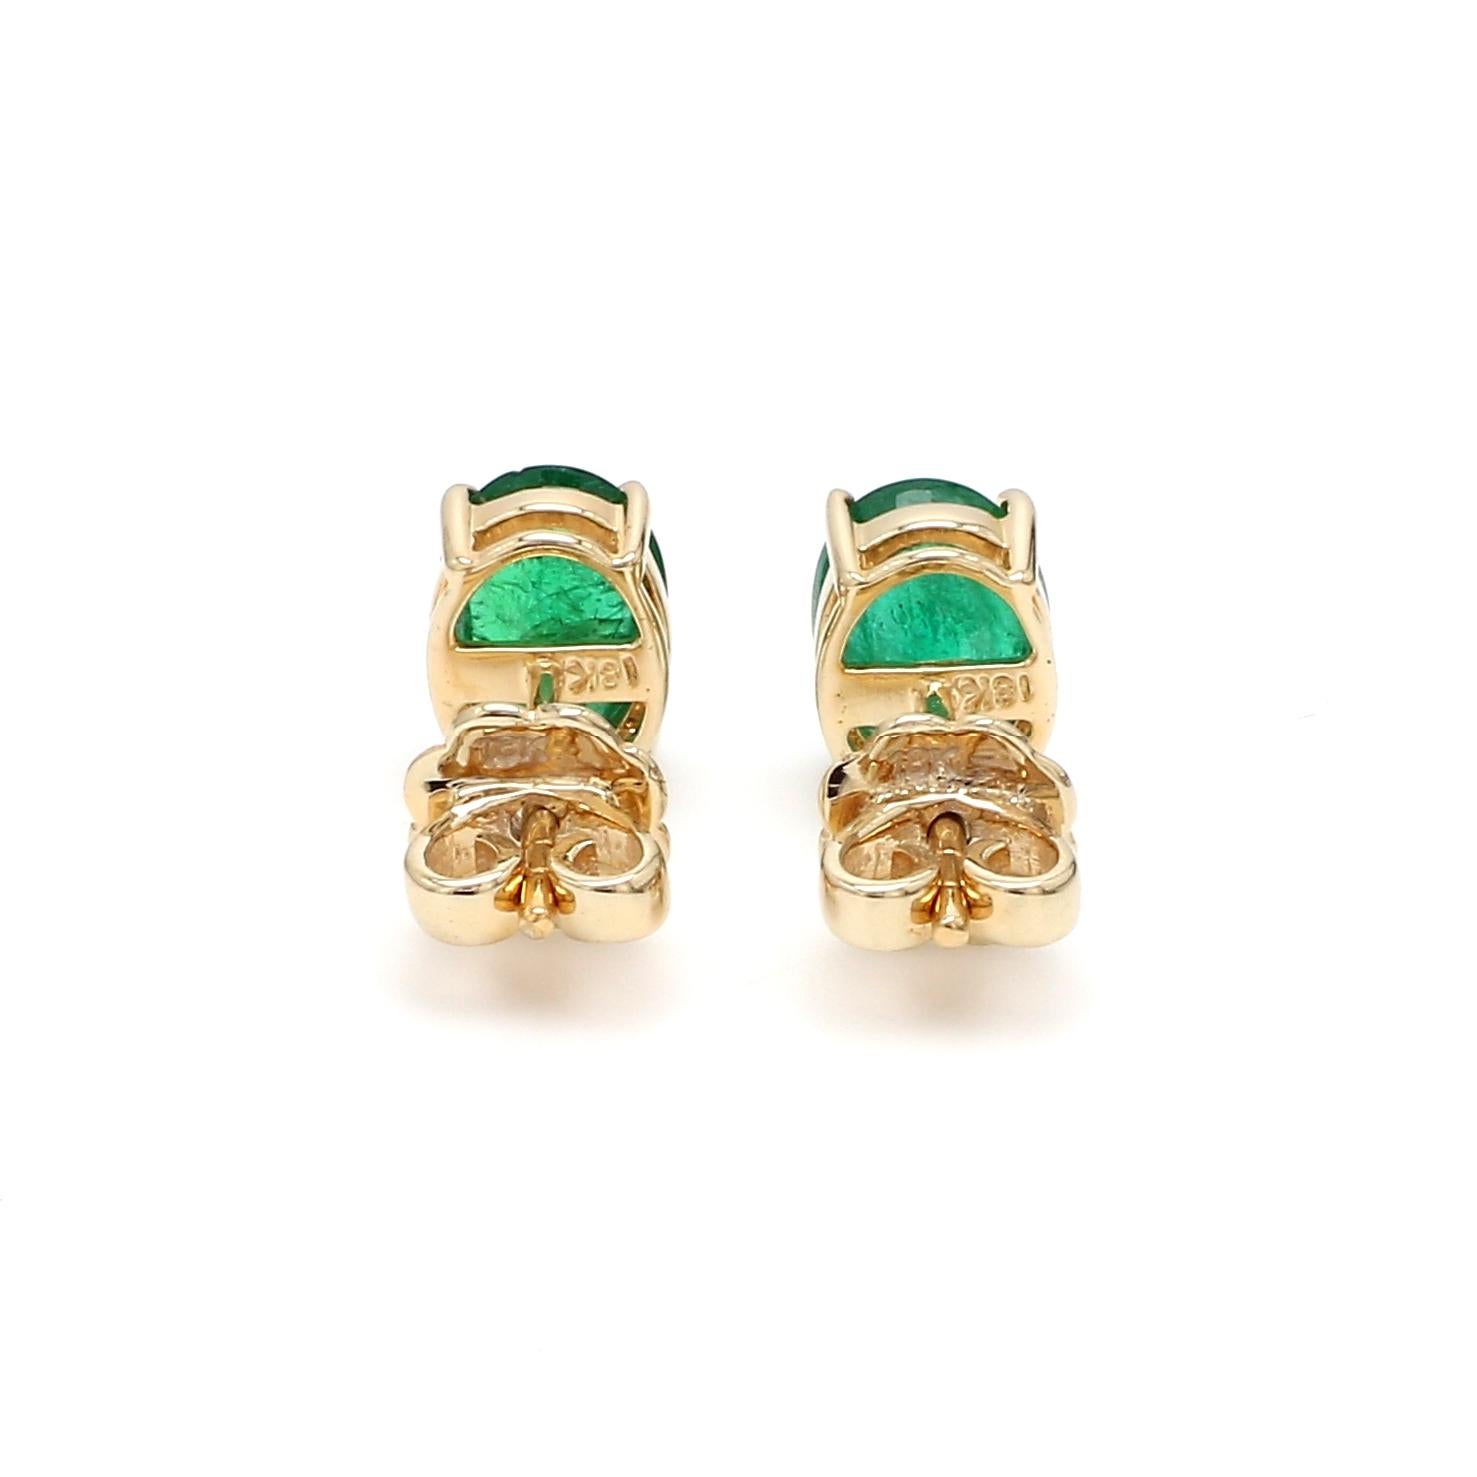 Item Code :- CN-24641
Gross Weight :- 2.80 gm
18k Solid Yellow Gold Weight :- 2.39 gm
Zambian Emerald Weight :- 2.05 carat
Earrings Length :- 8.14x6 mm approx.

✦ Sizing
.....................
We can adjust most items to fit your sizing preferences.